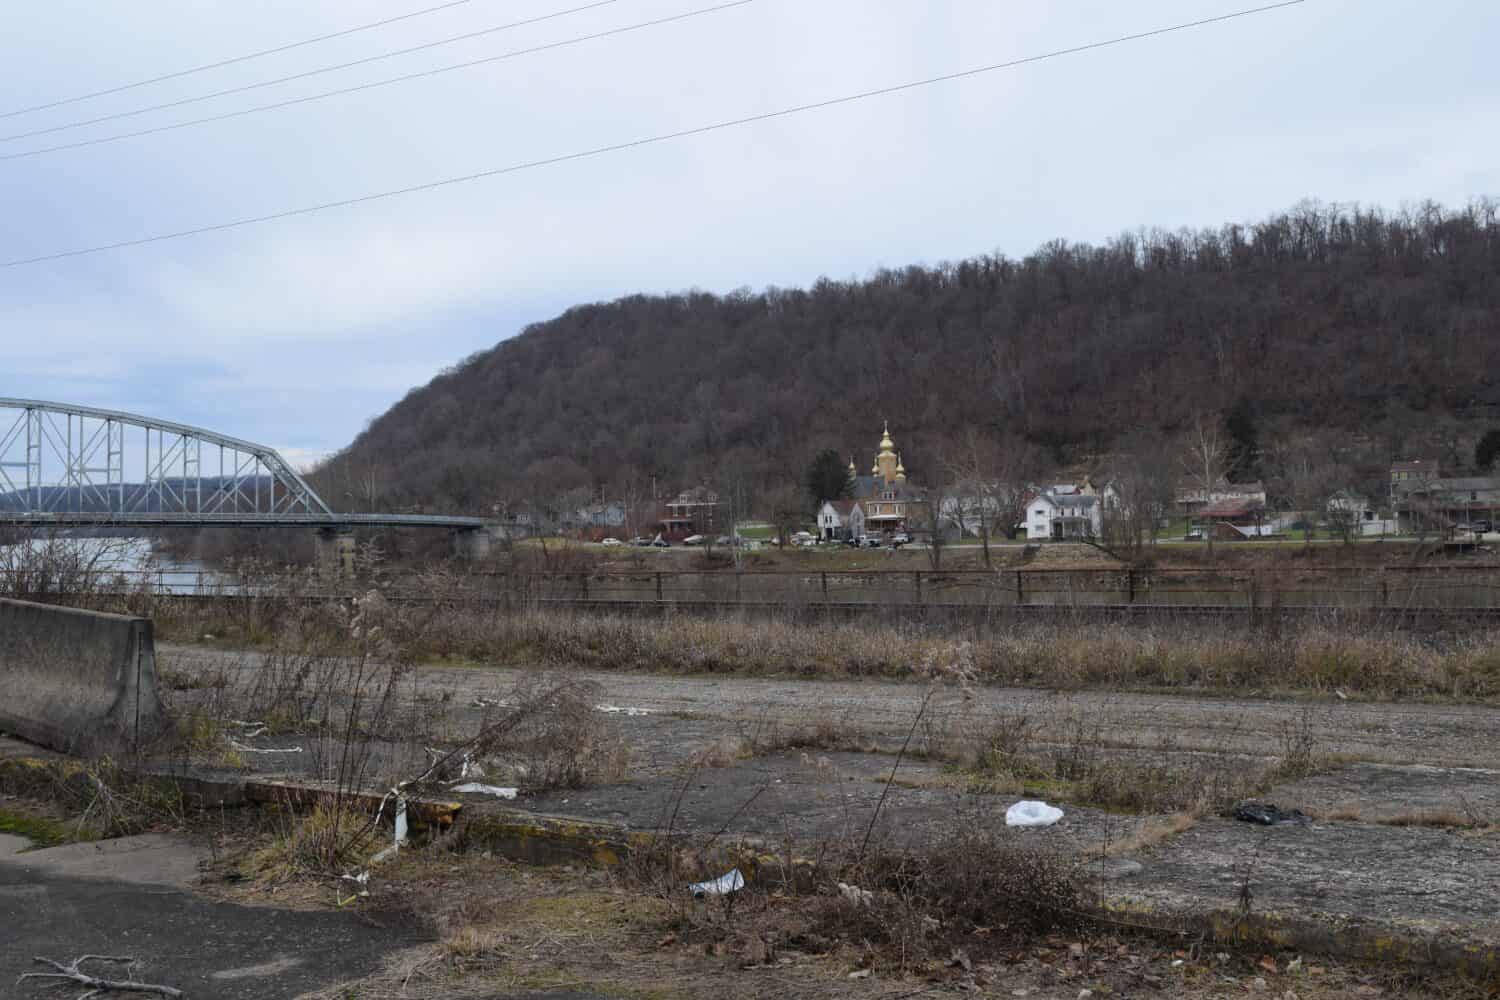 View of West Brownsville, Pennsylvania from across the river